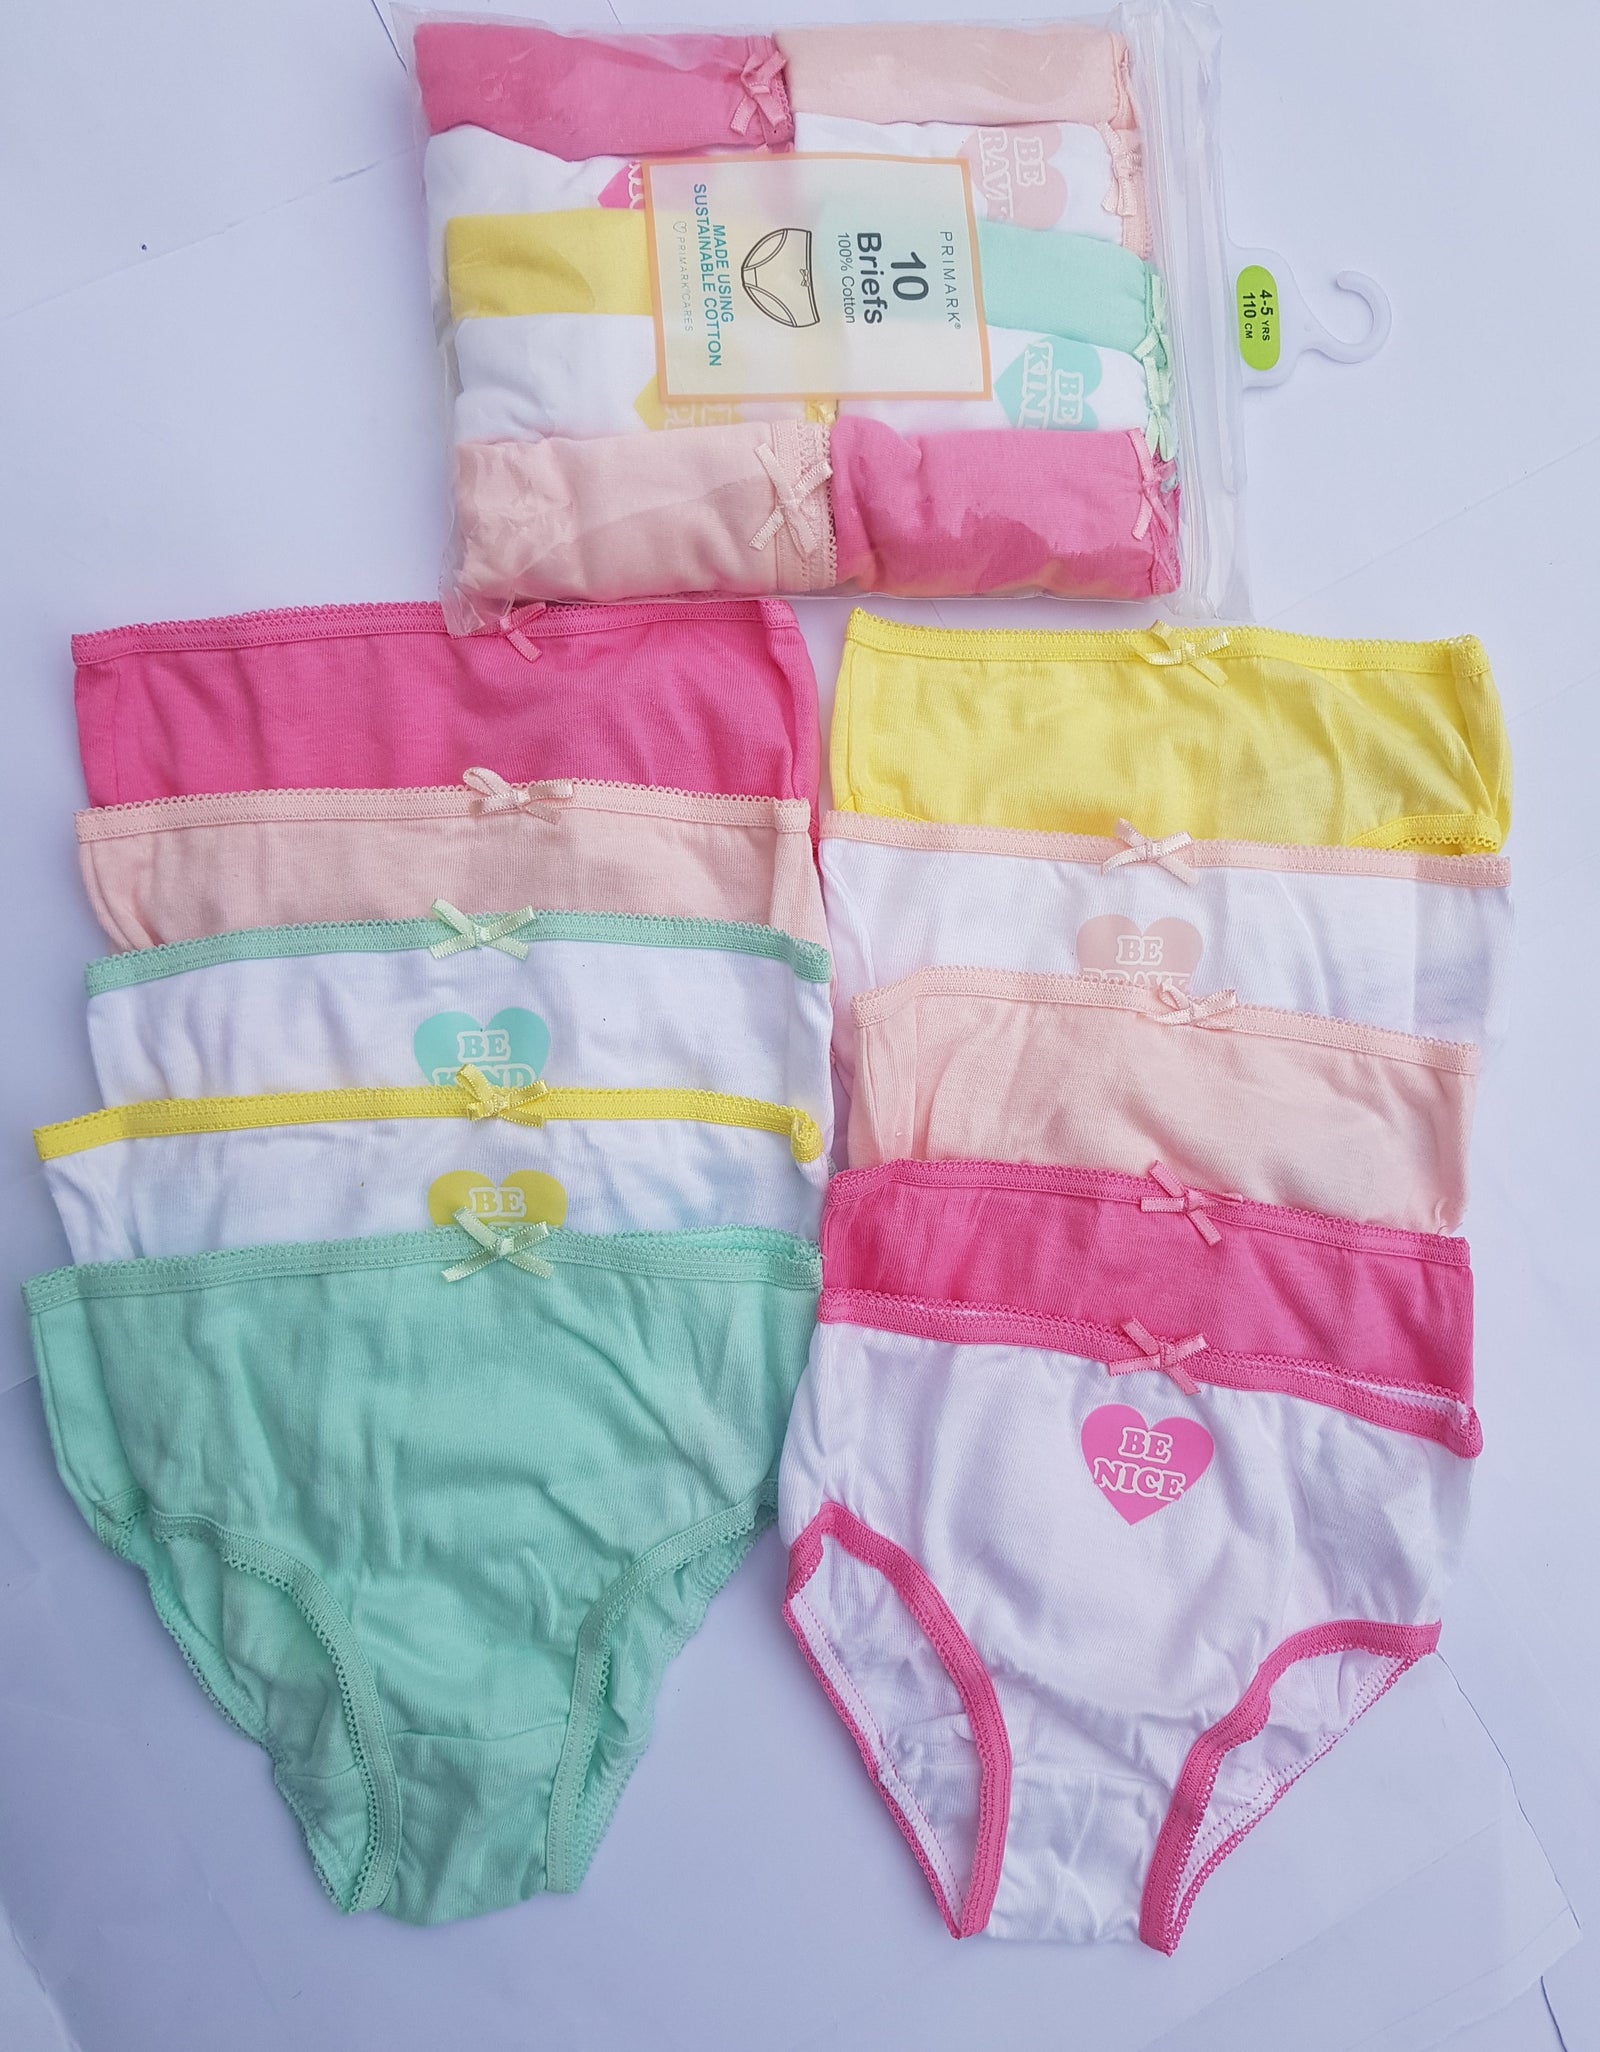 10 Pairs Knickers Days Of Week Primark Cotton Rich Girls Briefs Age 1 to 7  Years